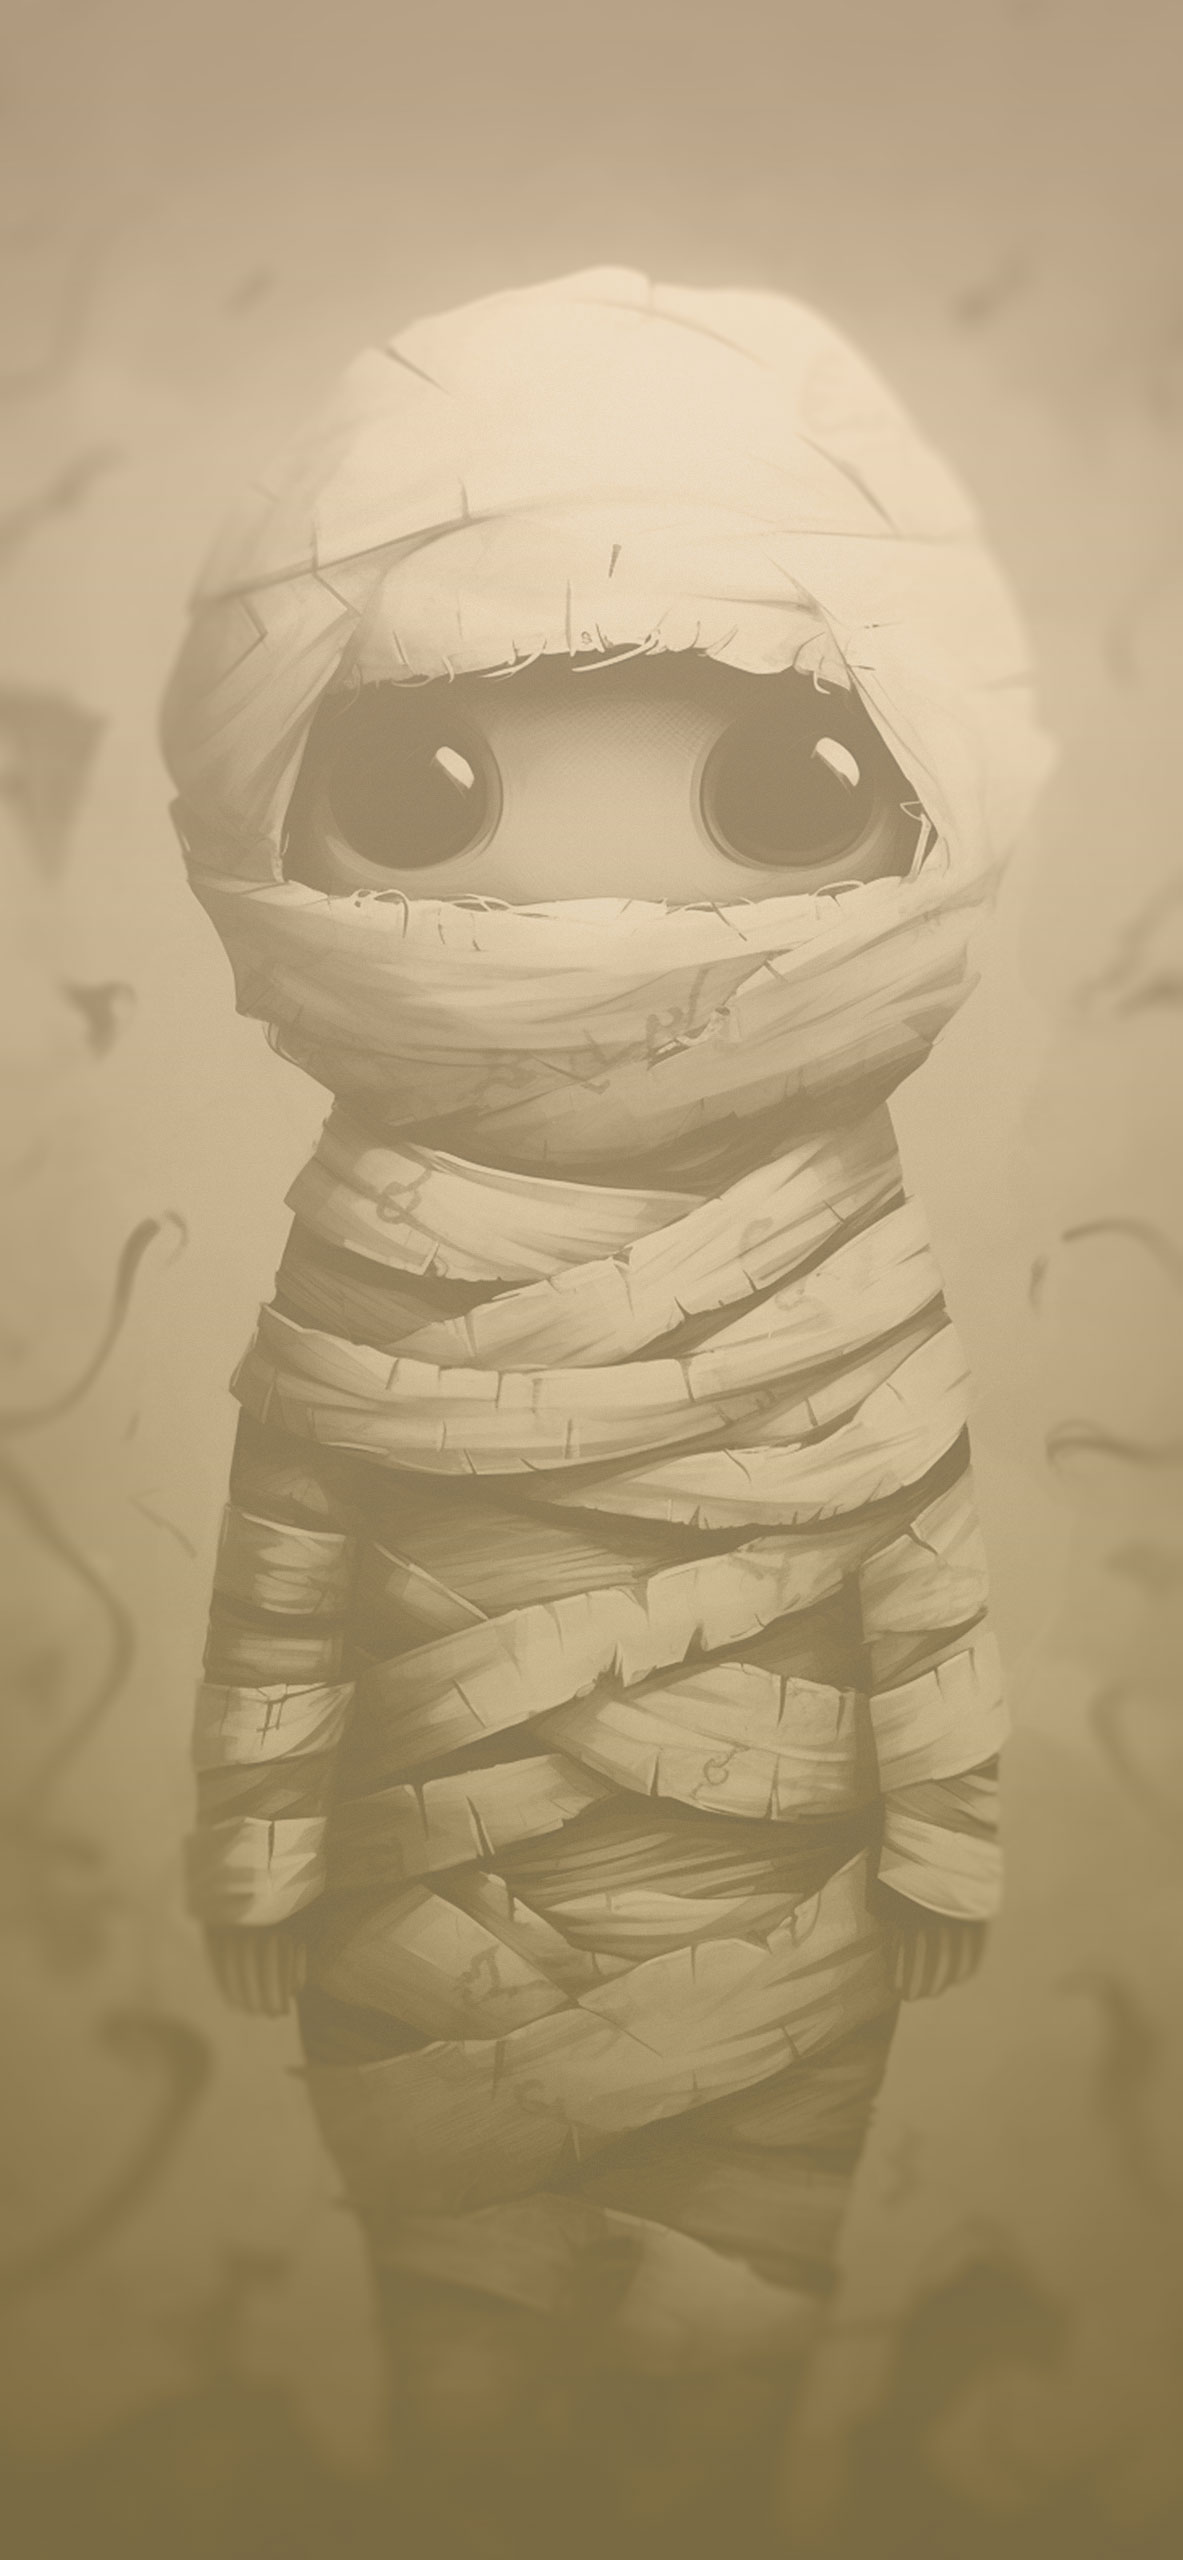 Cute mummy art wallpaper Cute mummy art wallpaper for iPhone